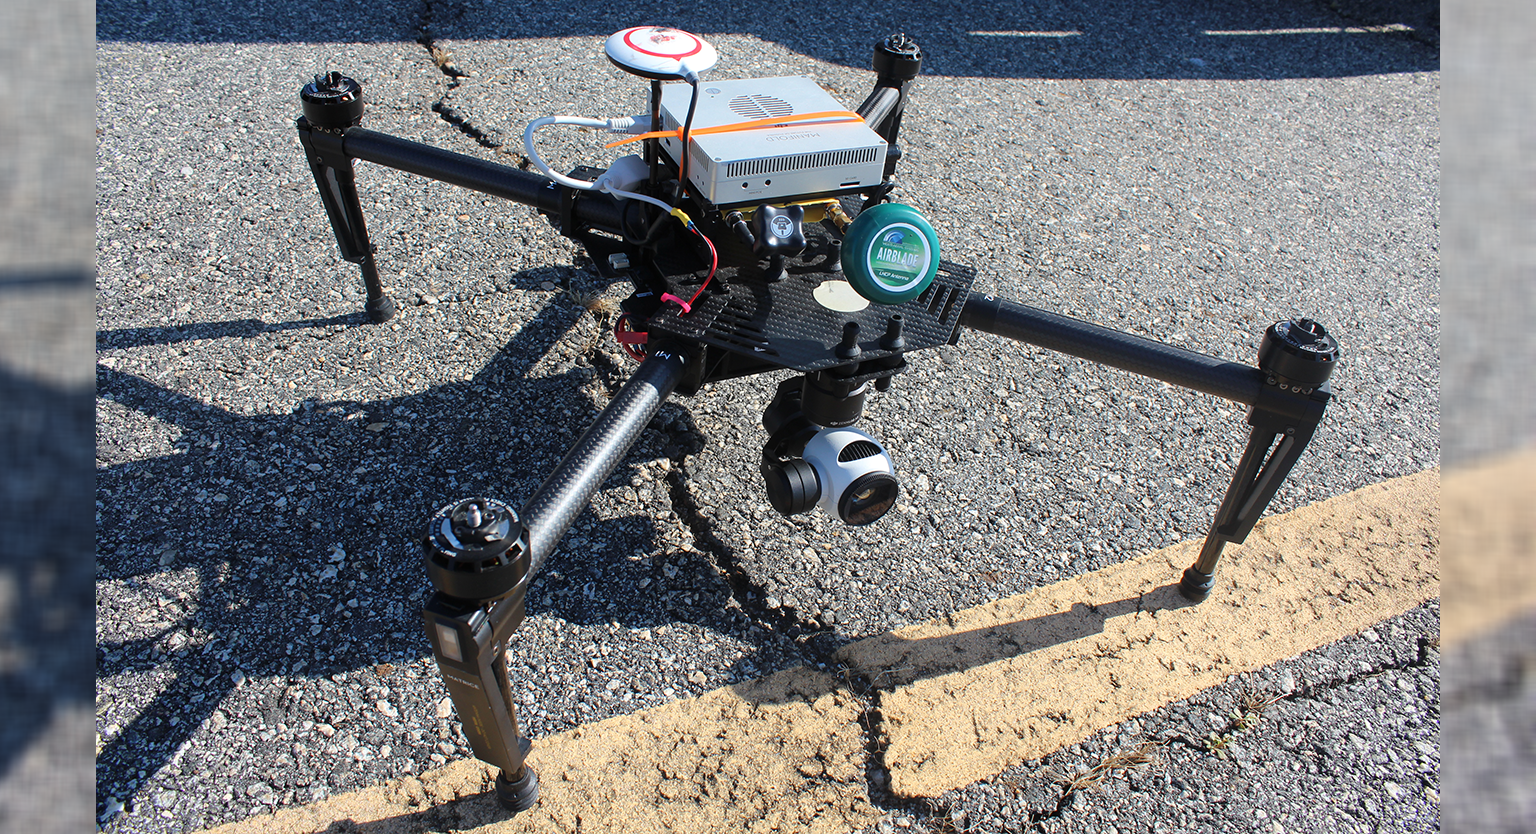 Drone equipped with advanced sensors sitting over cracked pavement.